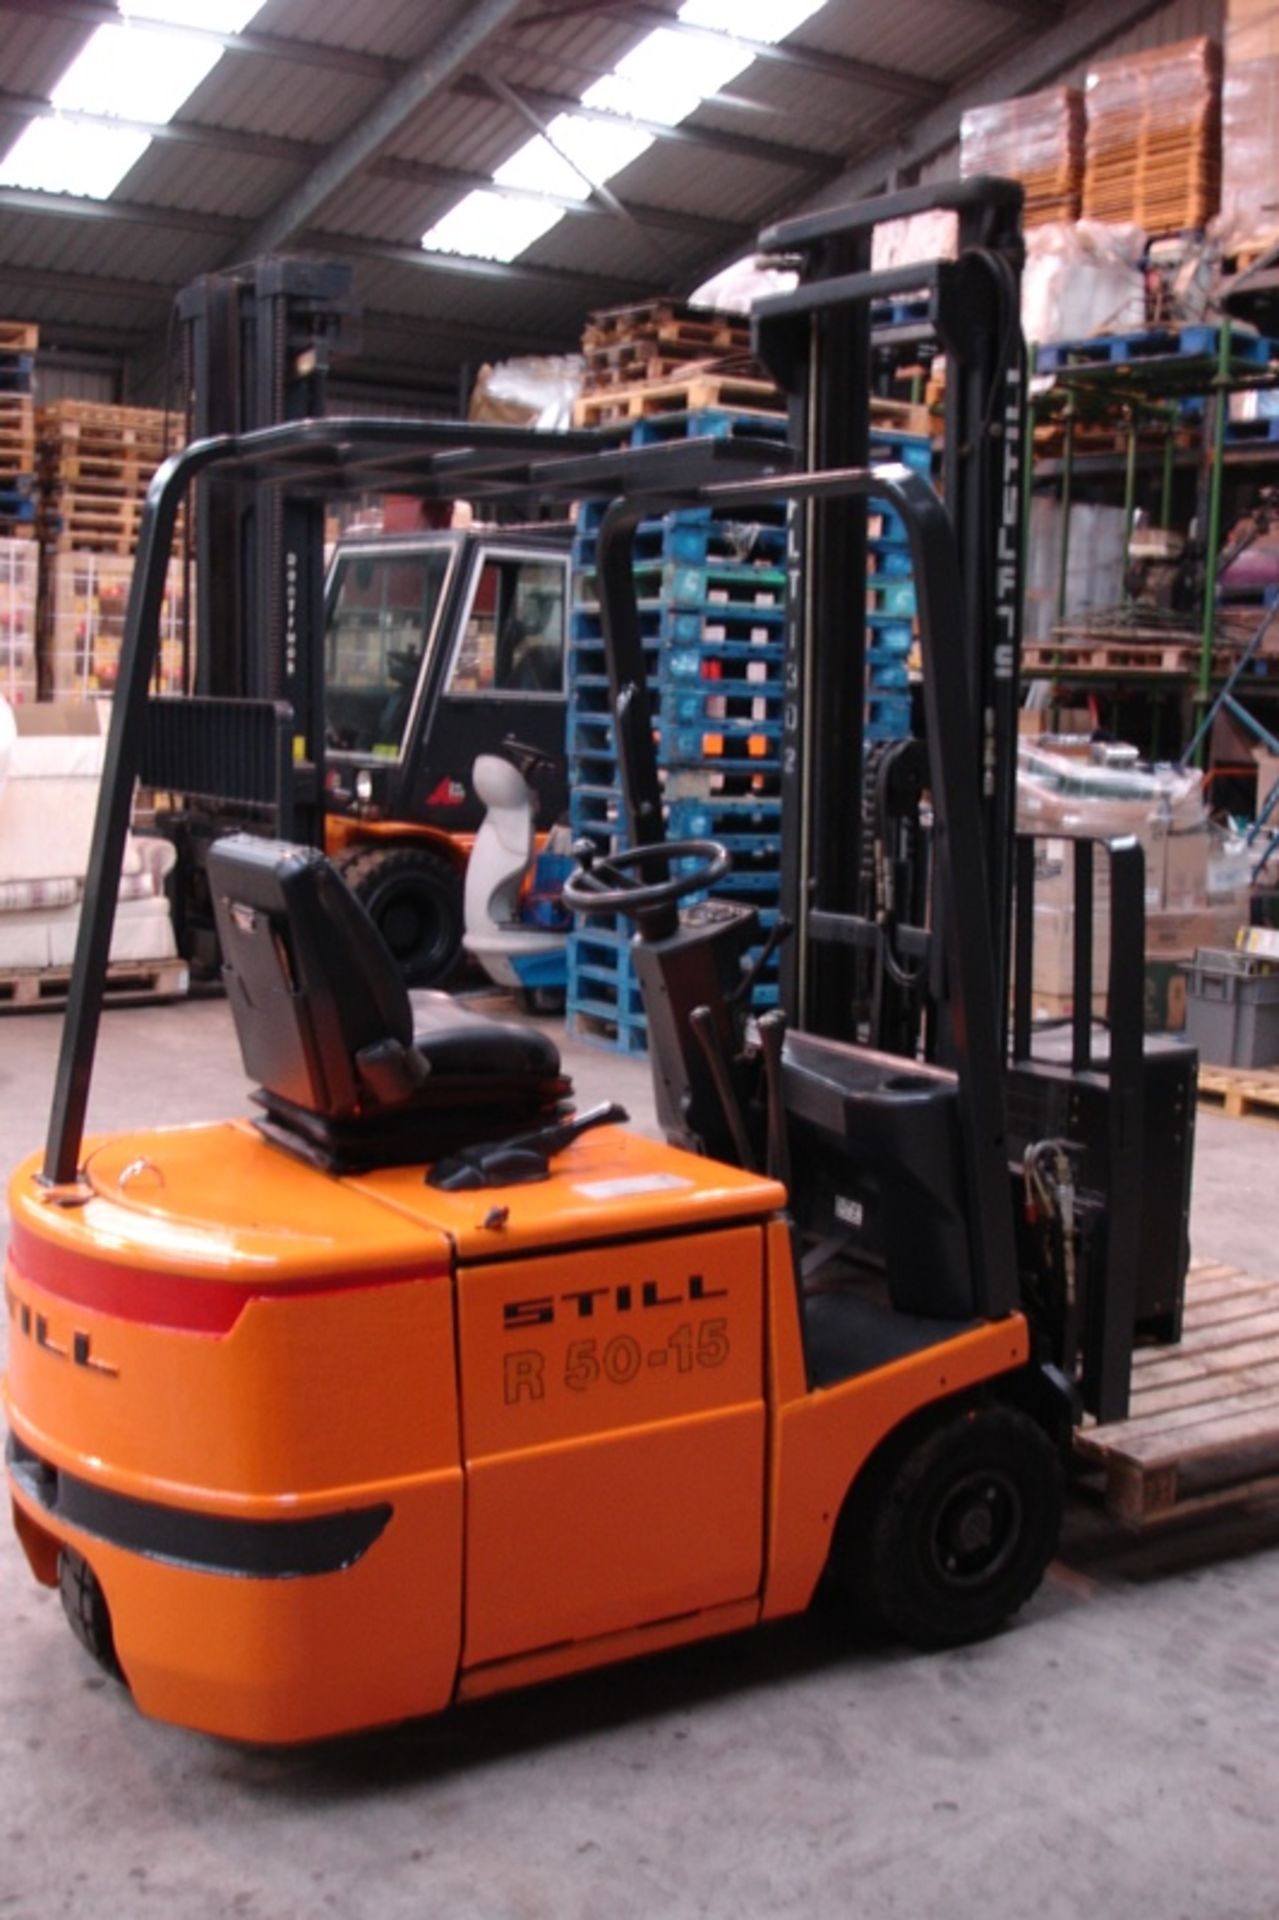 Still 1.5 Ton Electric Forklift - Image 3 of 7